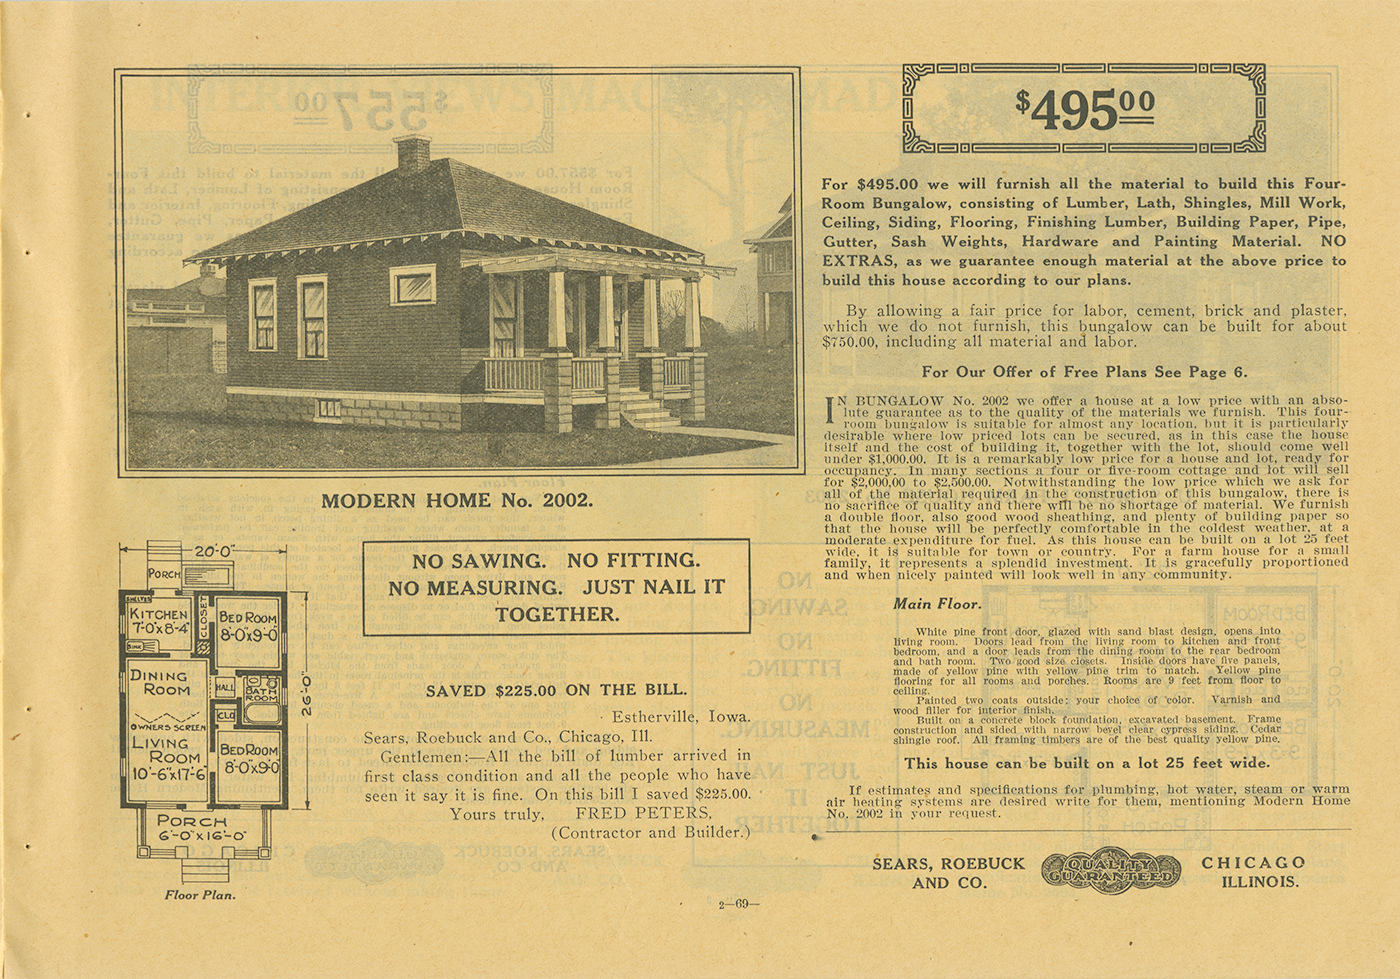 An advertisement for a Sears Modern Home